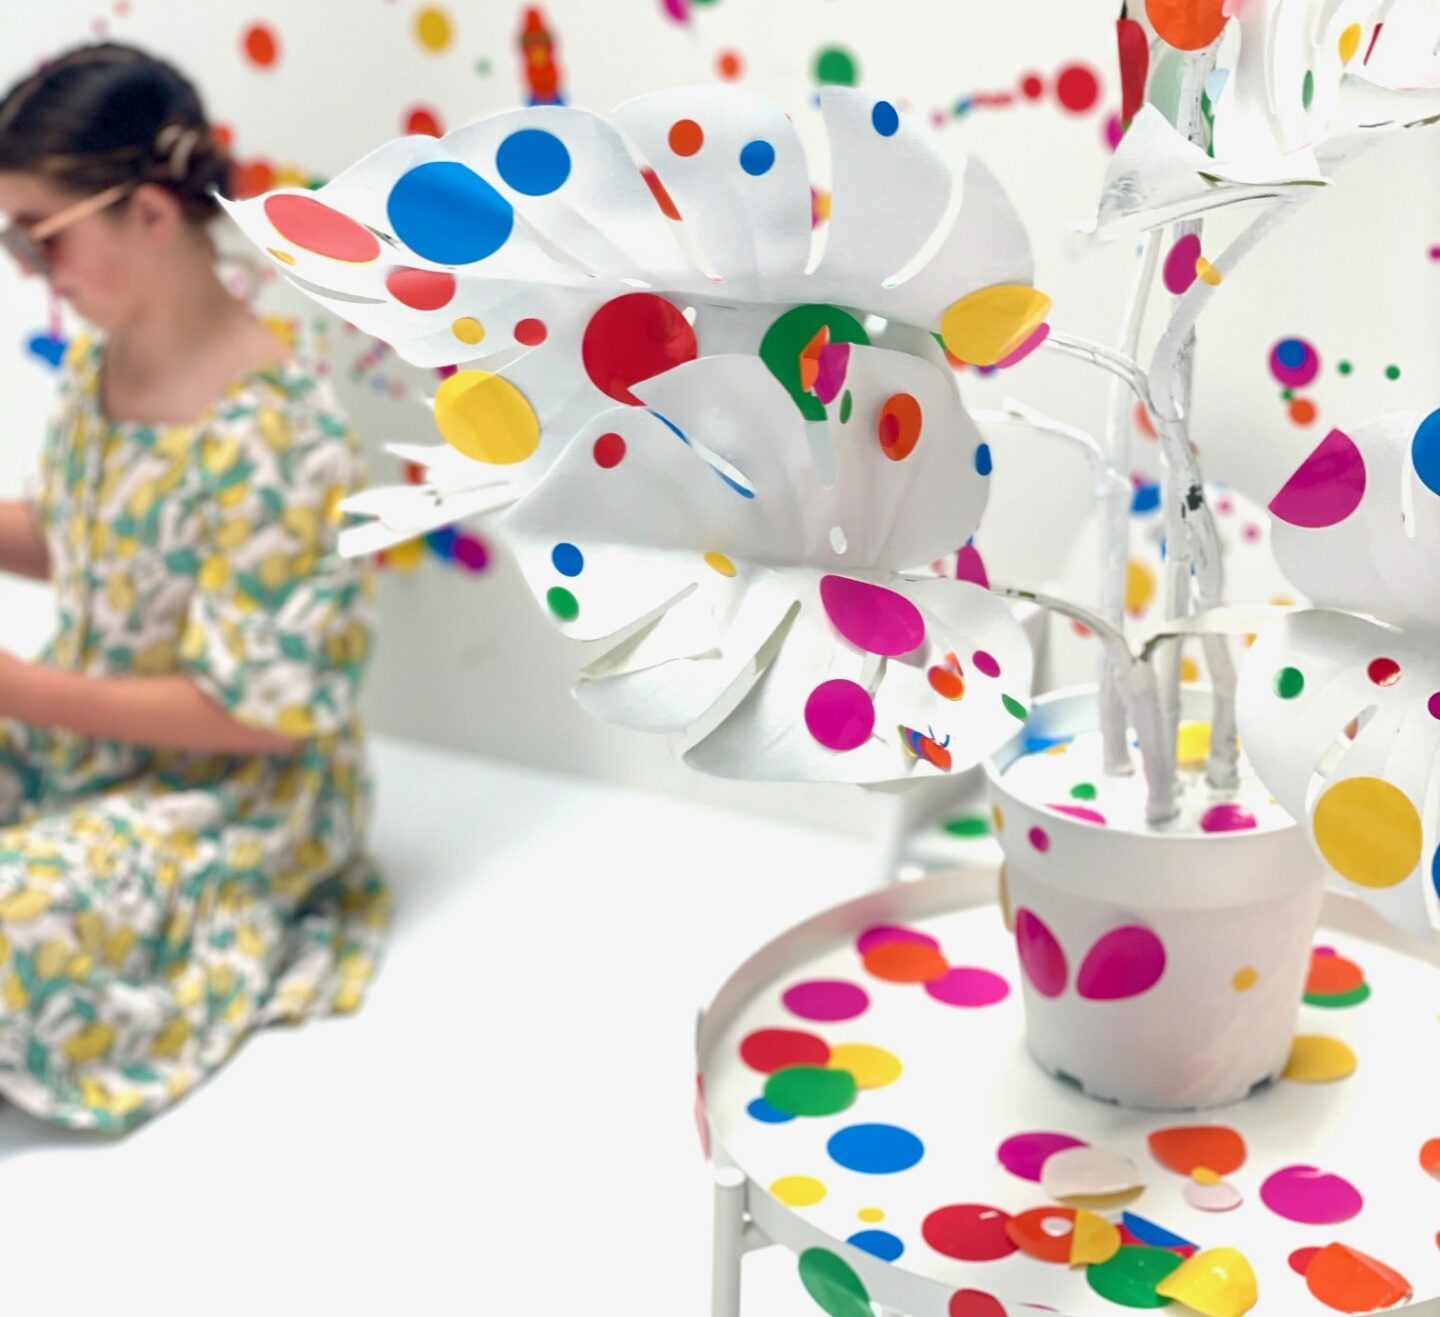 The Obliteration Room at Tate Modern London, free sticker activity art for kids